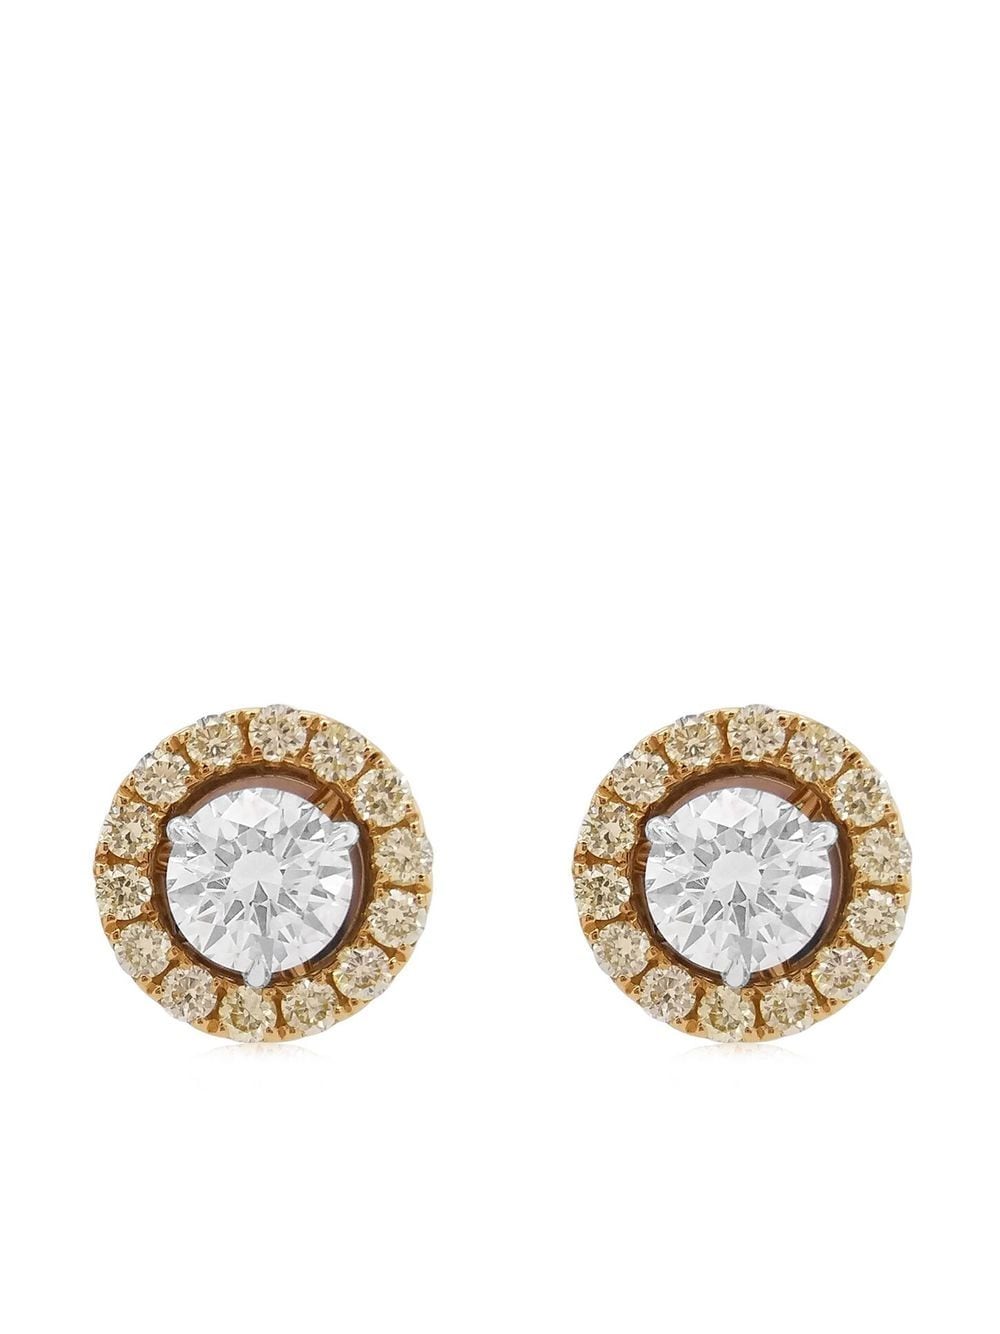 HYT Jewelry 18kt yellow and white gold diamond stud earrings von HYT Jewelry